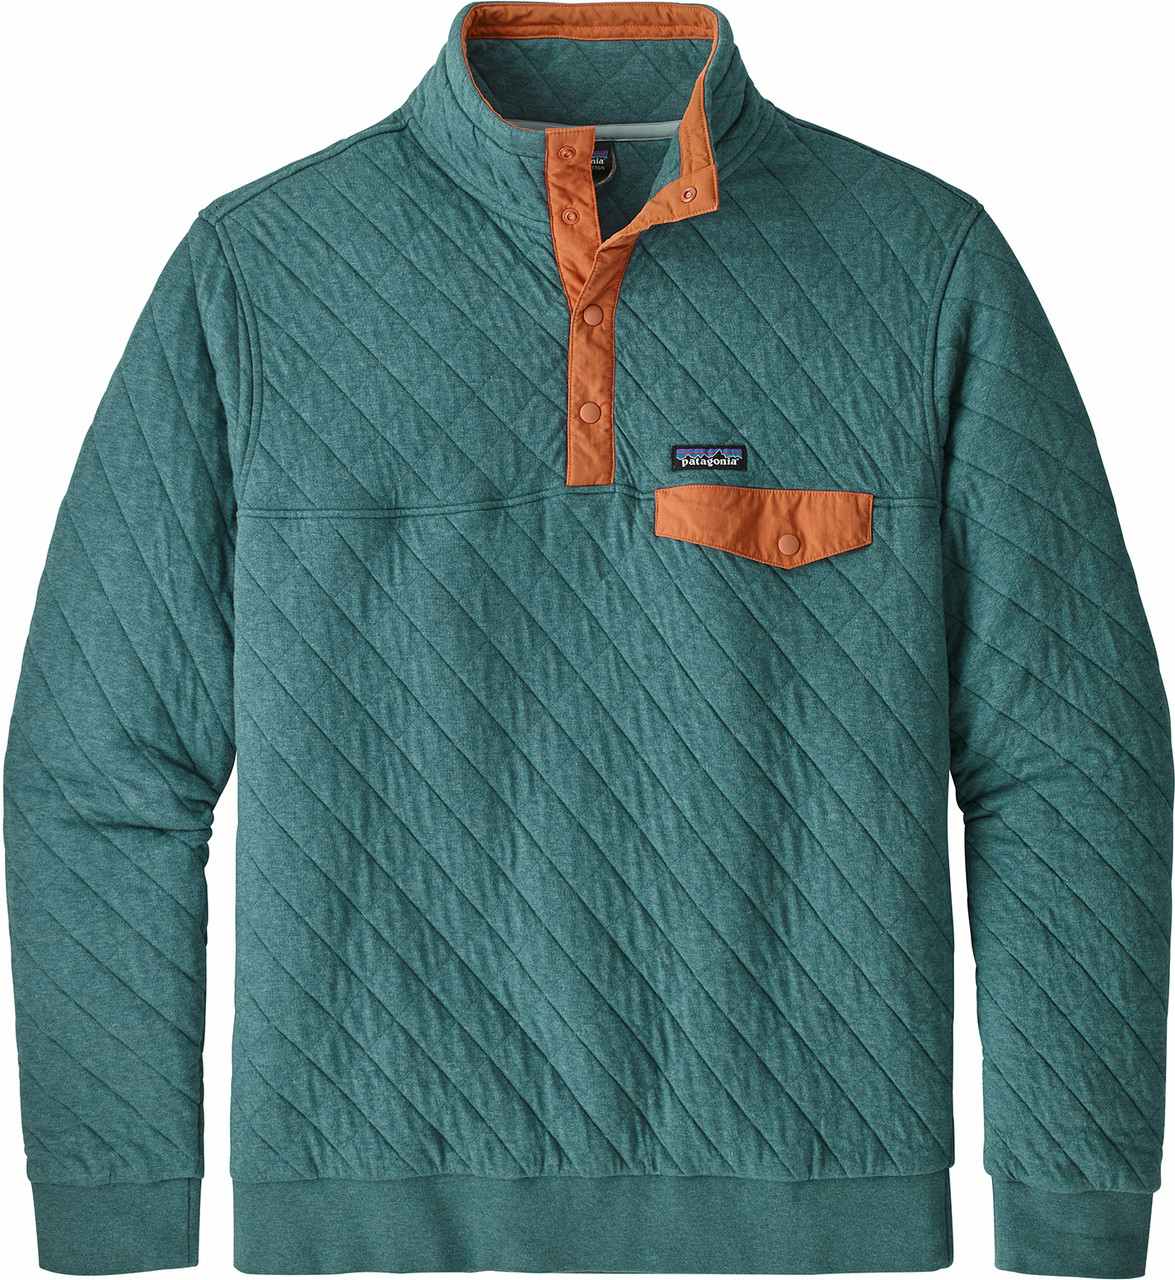 Cotton Quilt Snap-T Pullover Tasmanian Teal